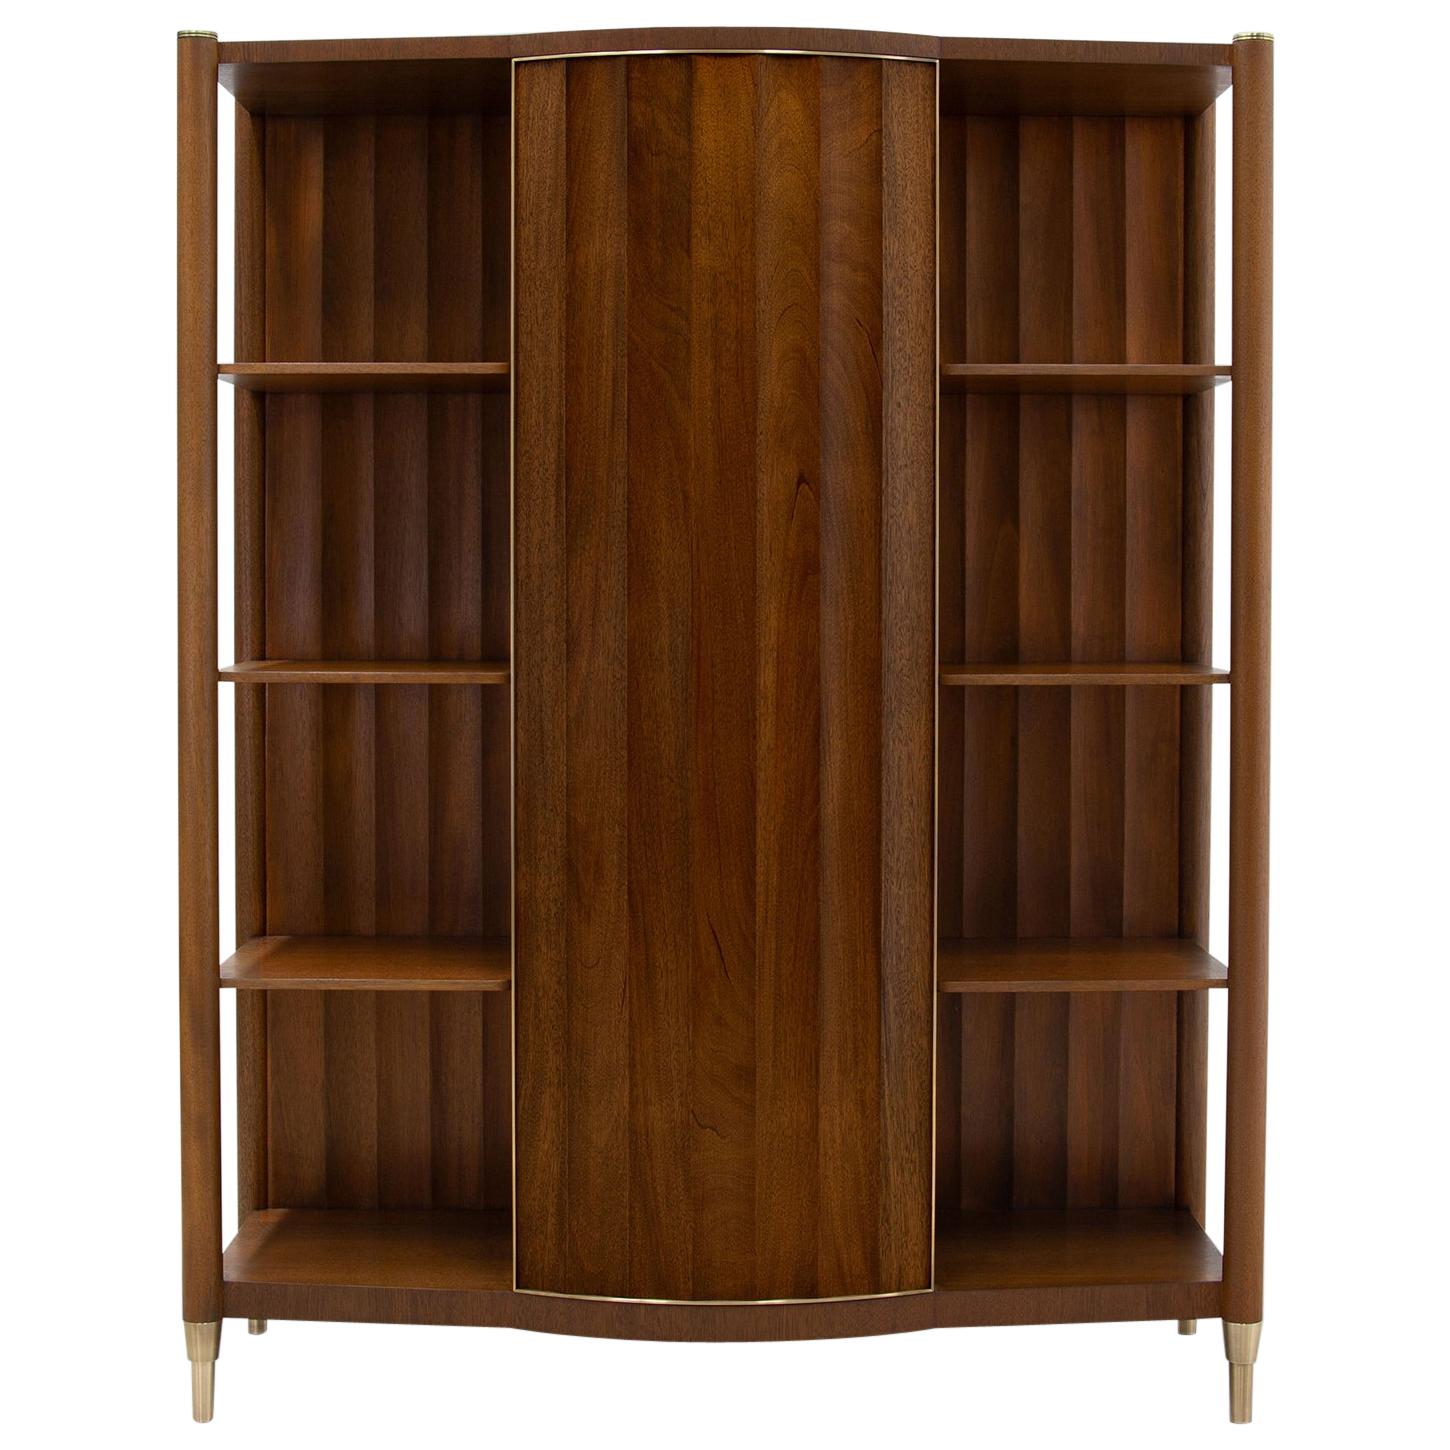  Landon Bookcase or Dry Bar in Mahogany with Brass Accents by Chapter & Verse For Sale